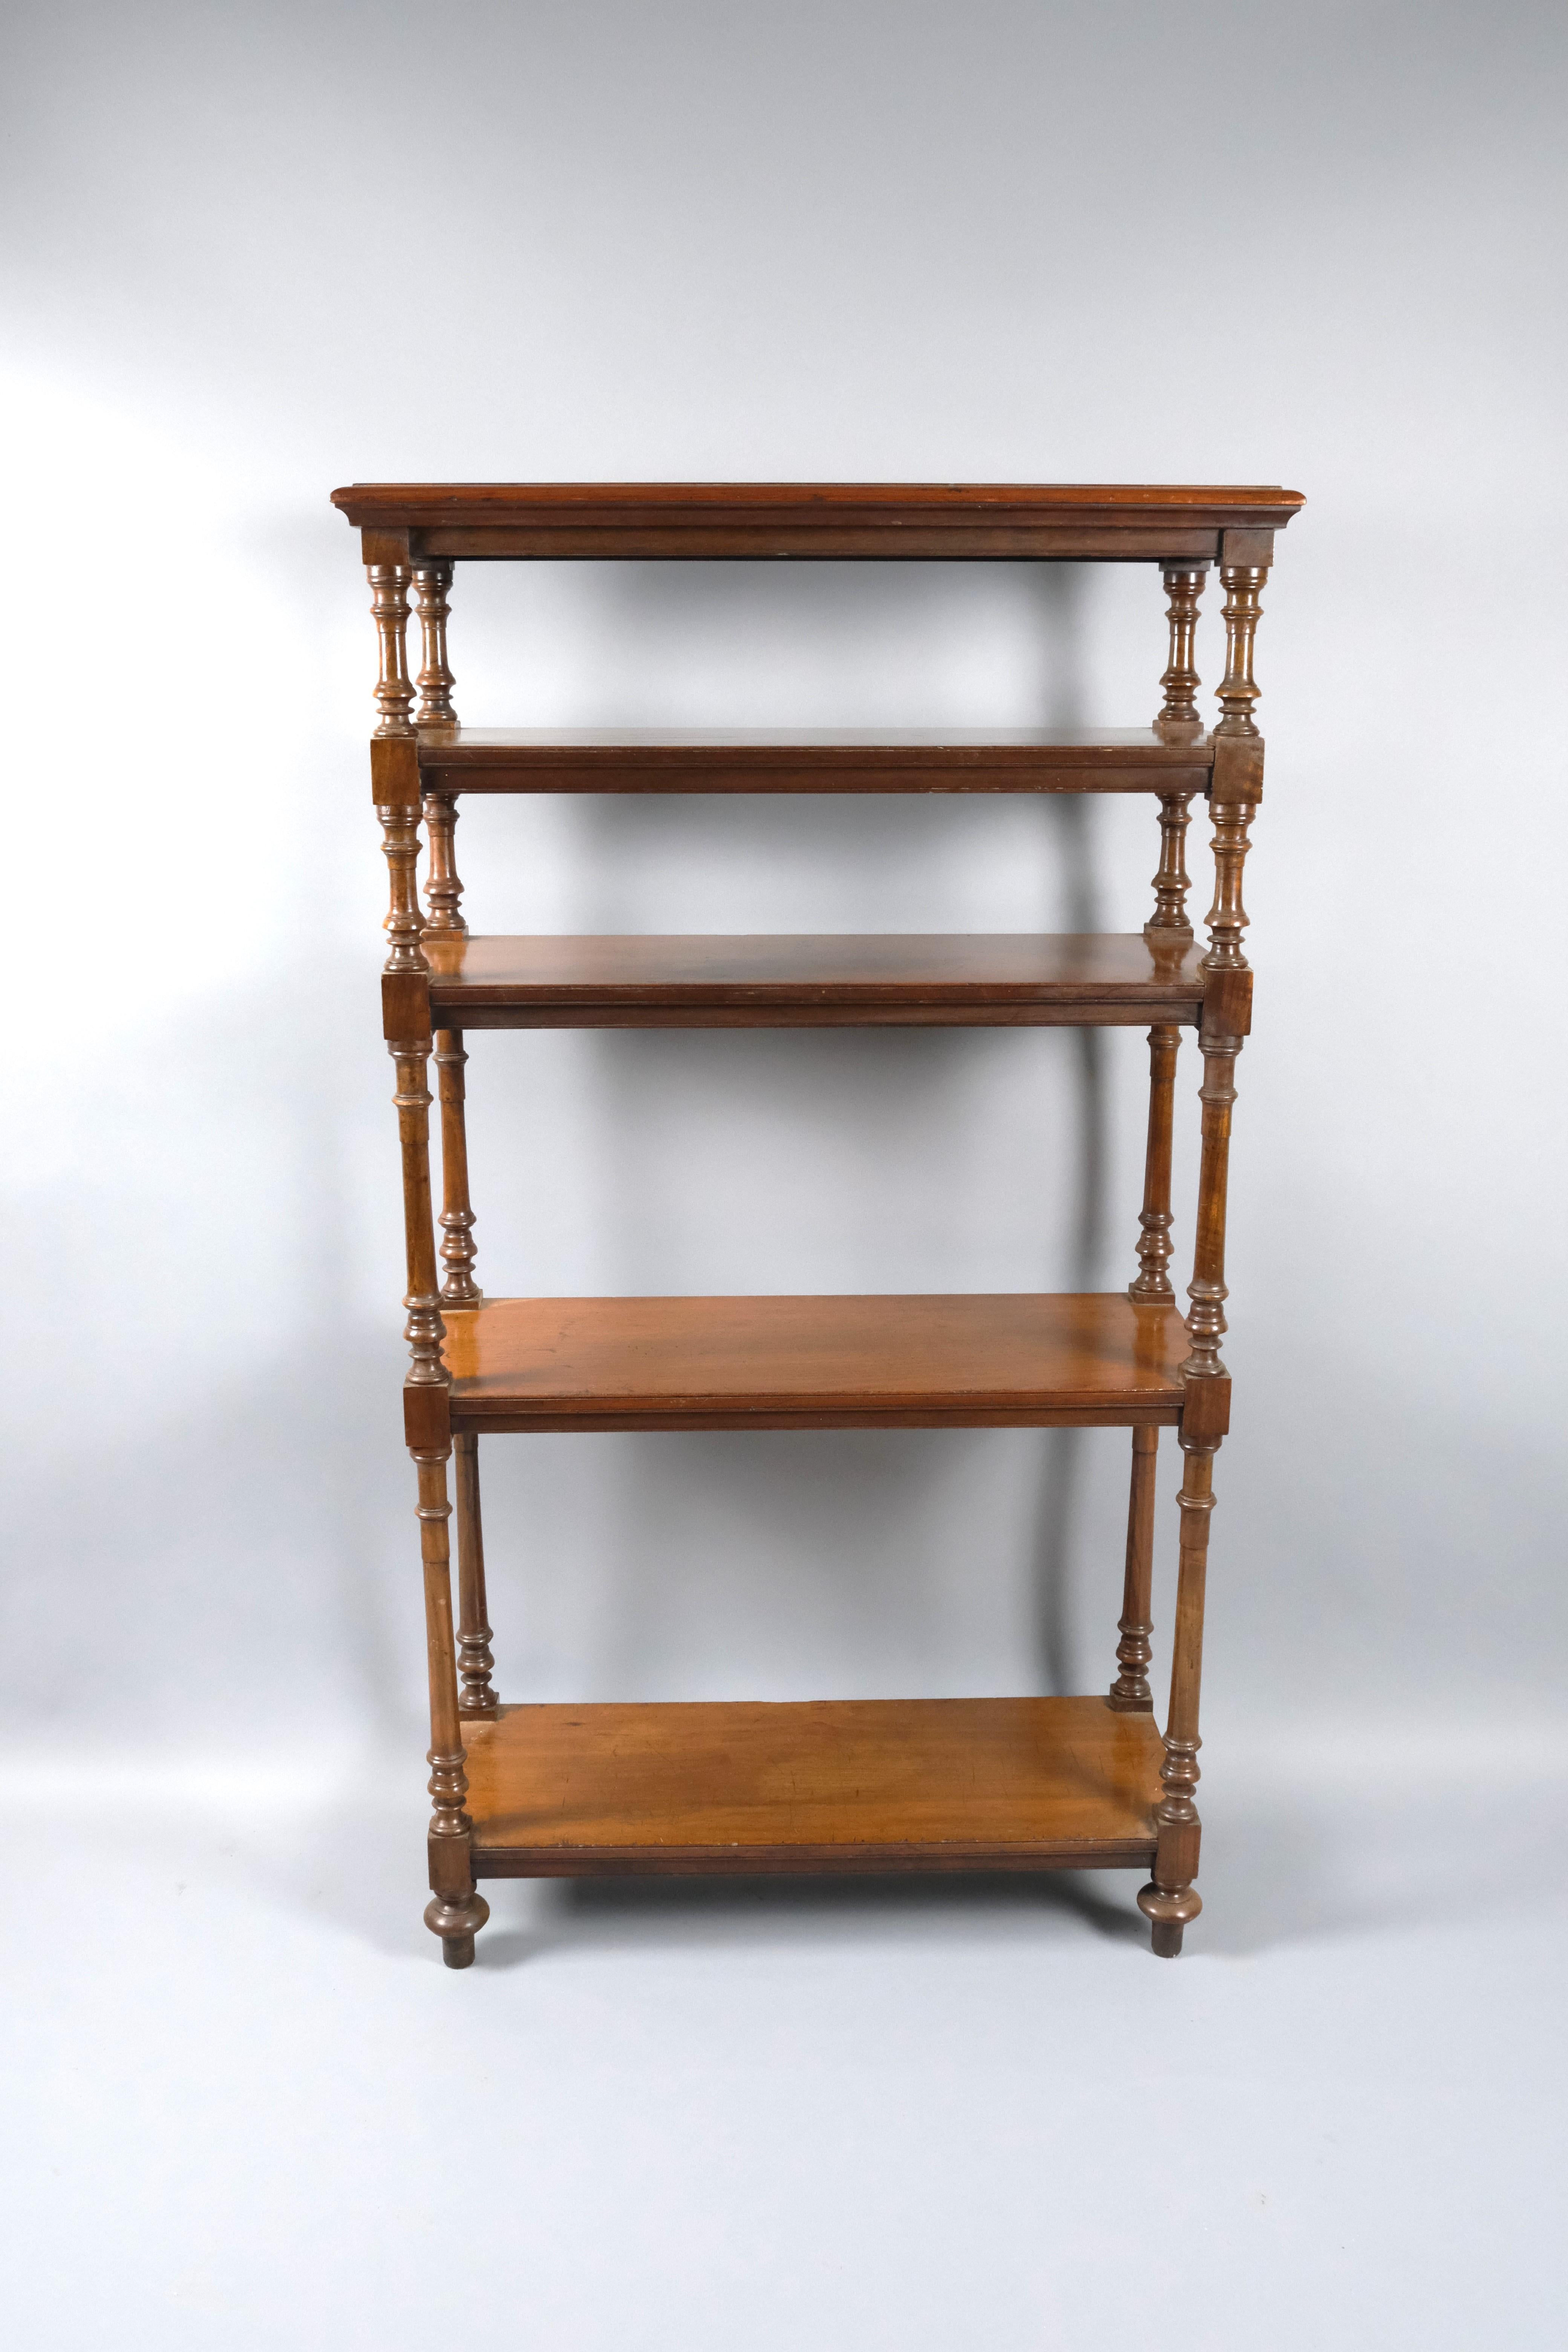 Antique Walnut Whatnot/ Shelves In Good Condition For Sale In Cheltenham, GB